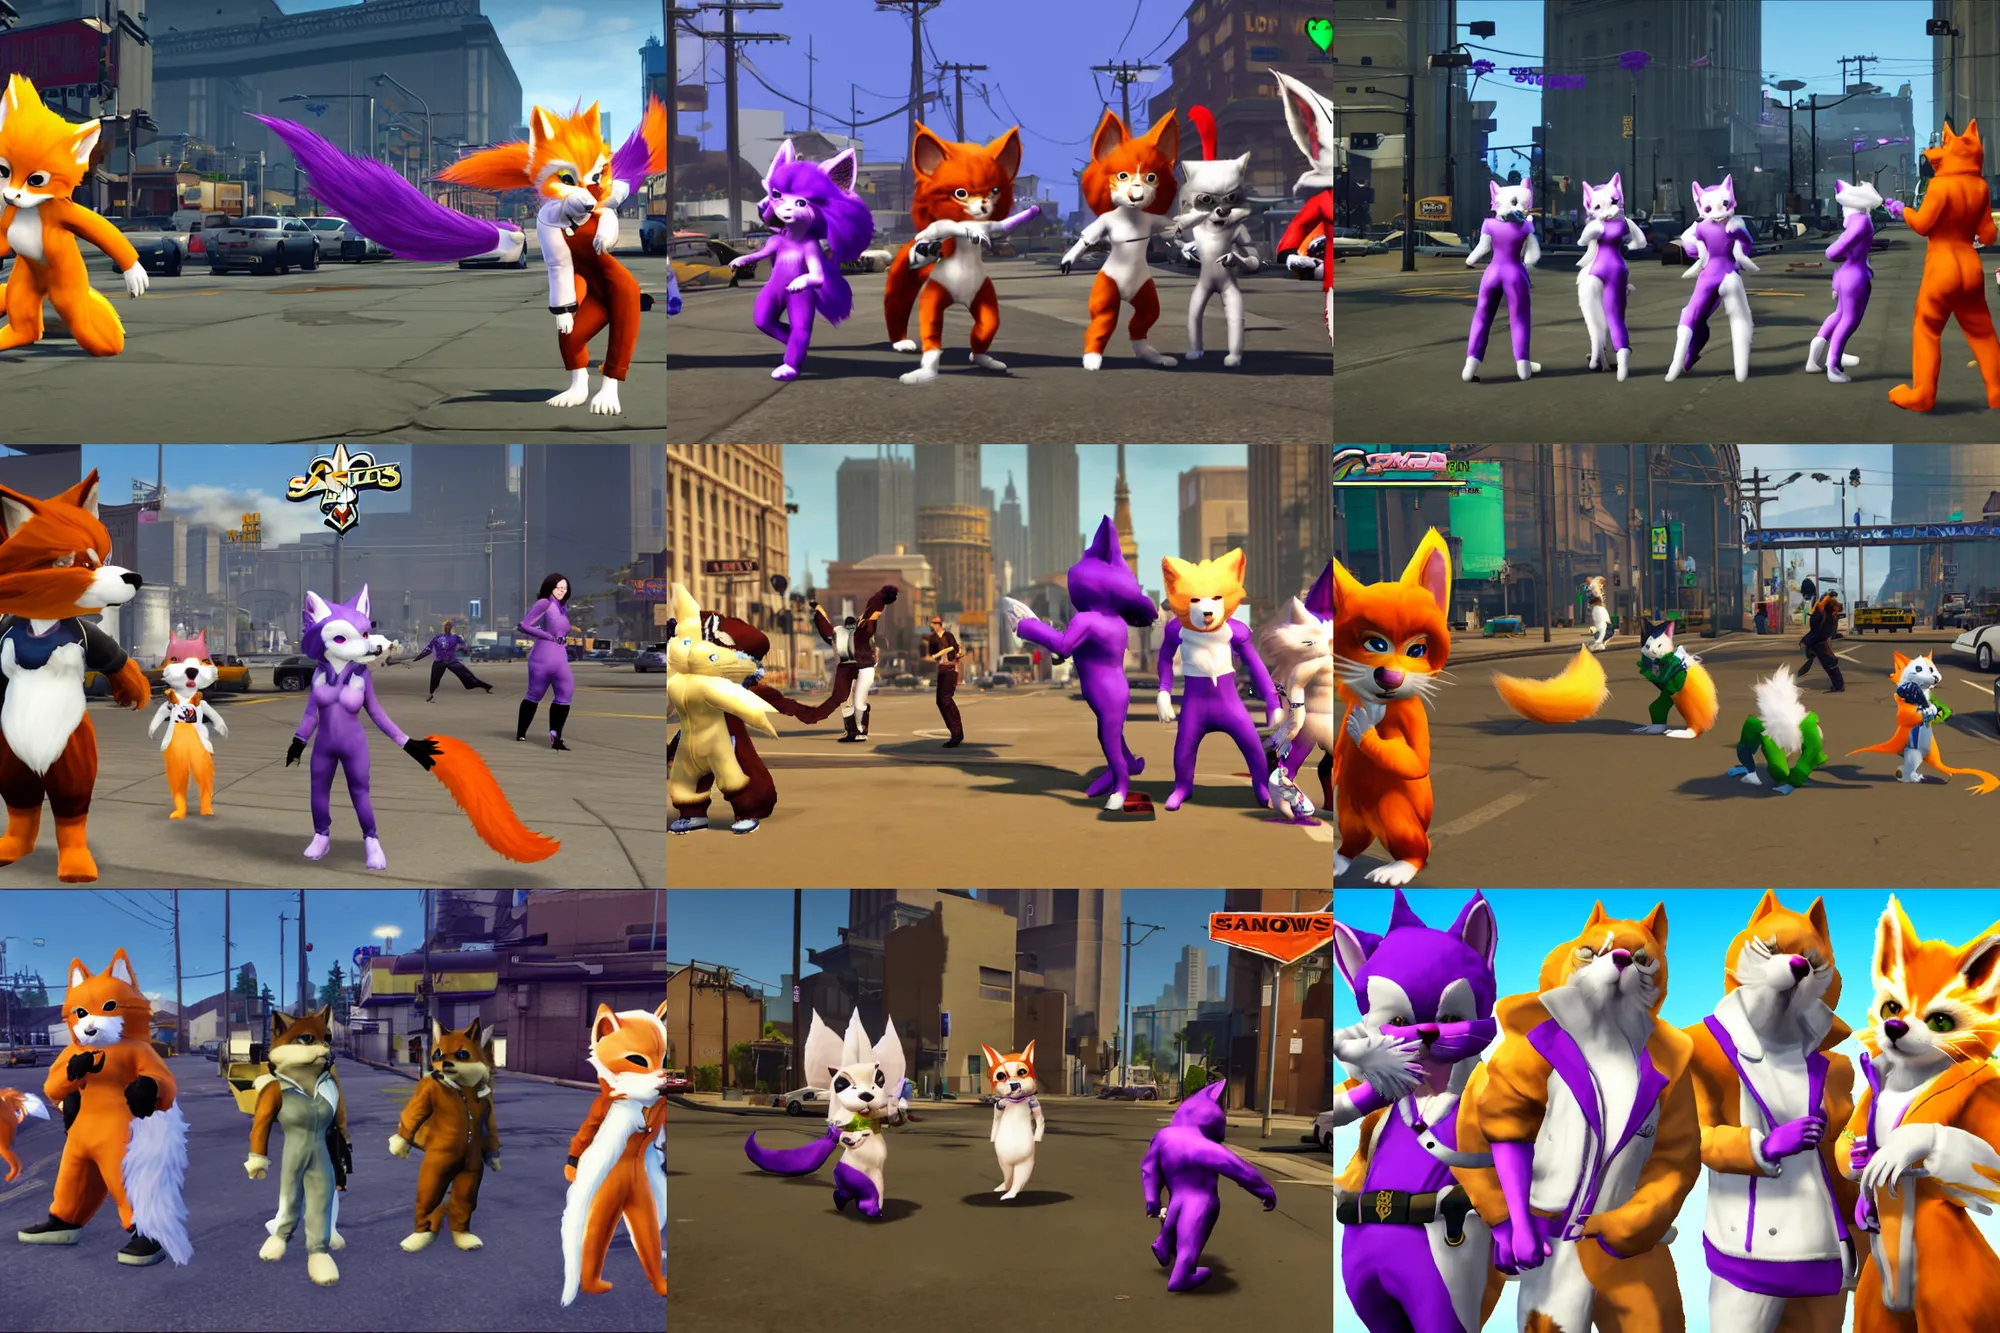 Prompt: screenshot, saints row, tails being worn, furries wearing tails ( fursuiters + tails )